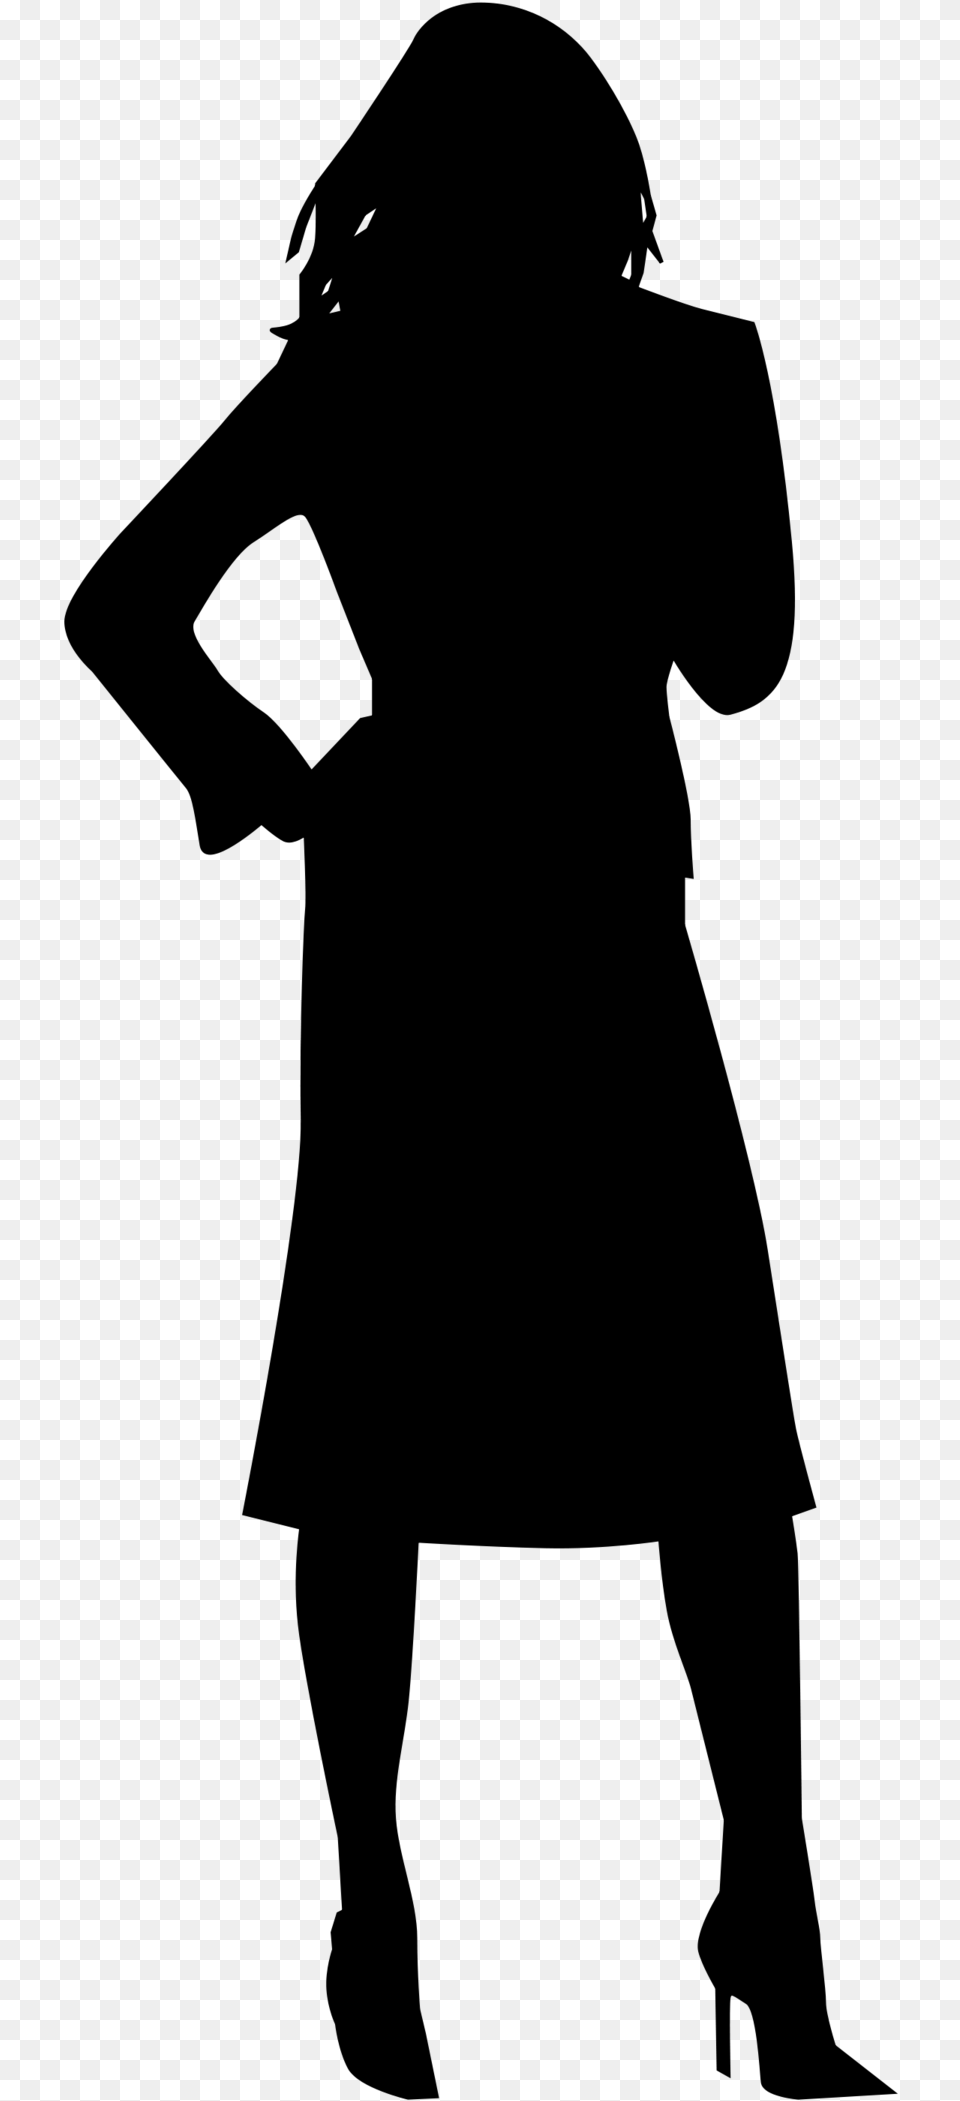 Background Silhouette At Getdrawings Woman Silhouette Icon, Gray Free Png